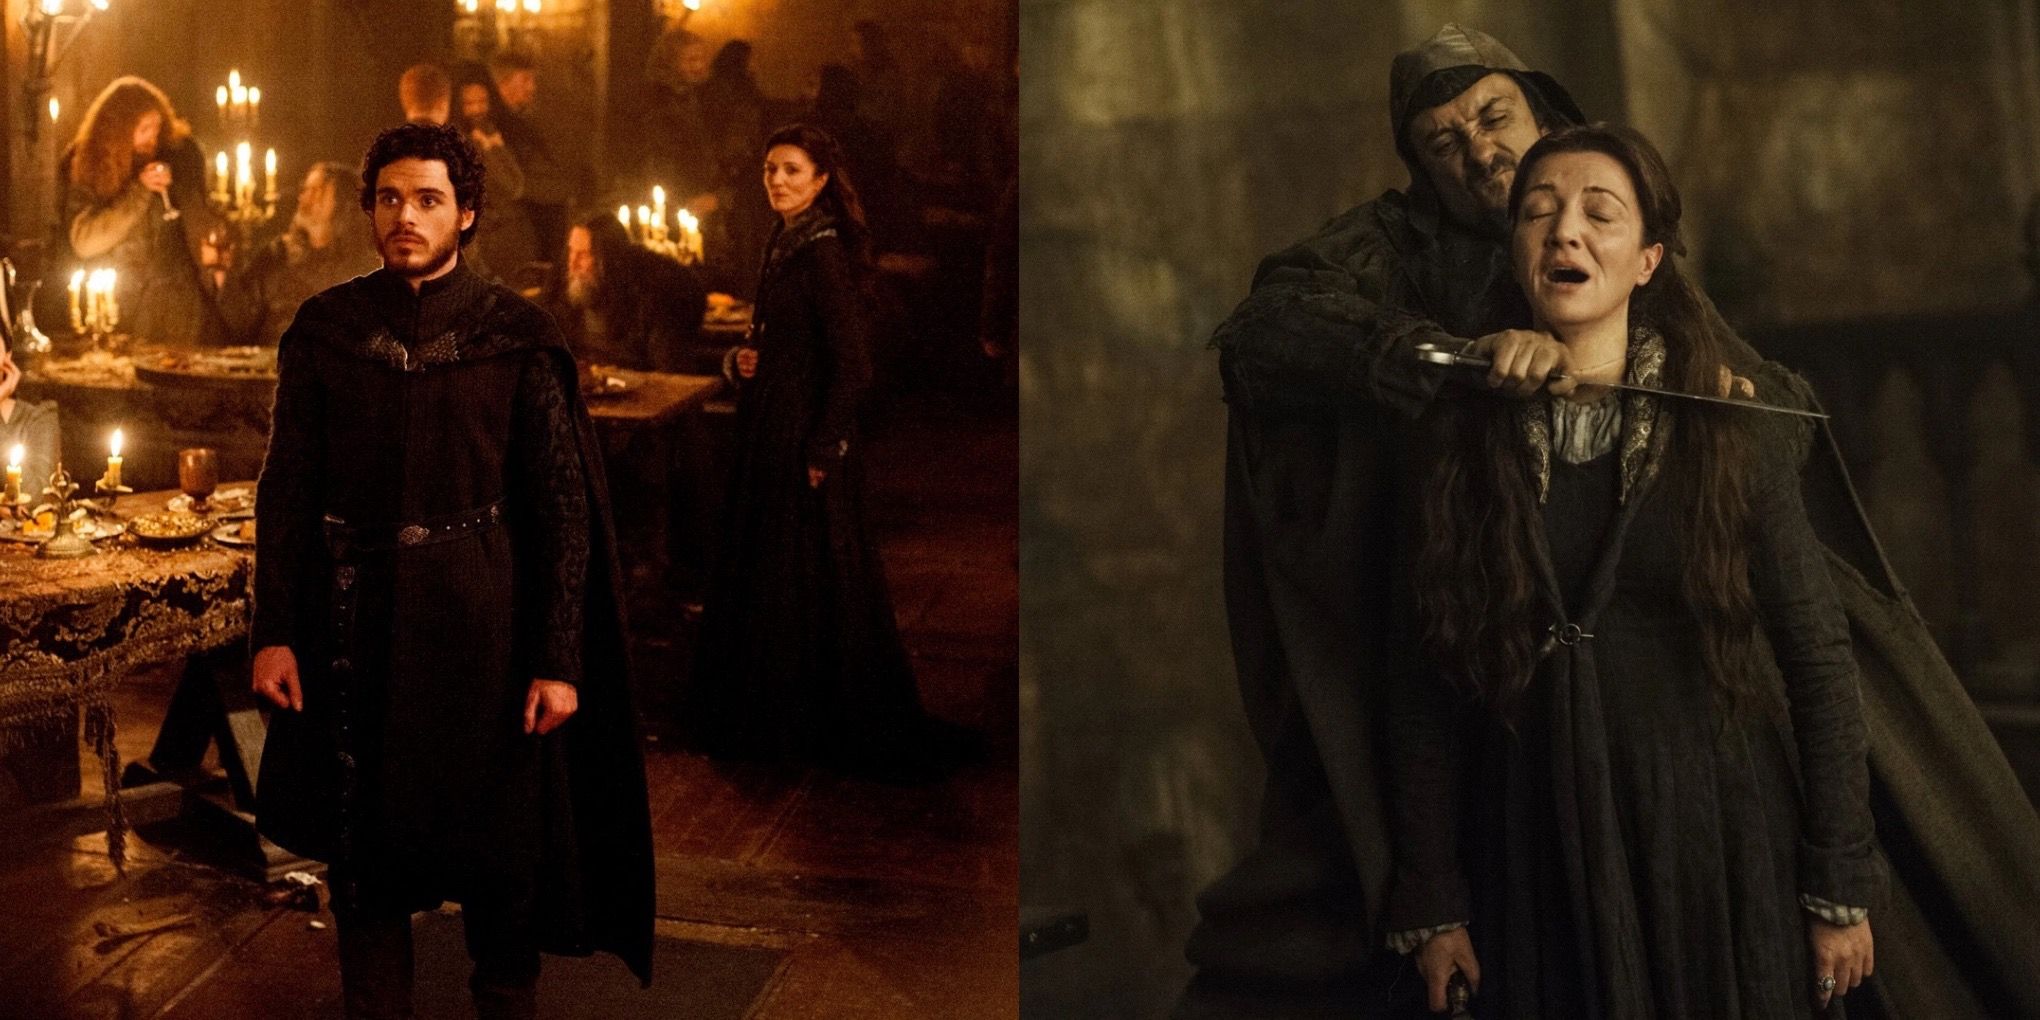 of Thrones: 10 Things From The "The Red Wedding" Episode That Fans Are Upset